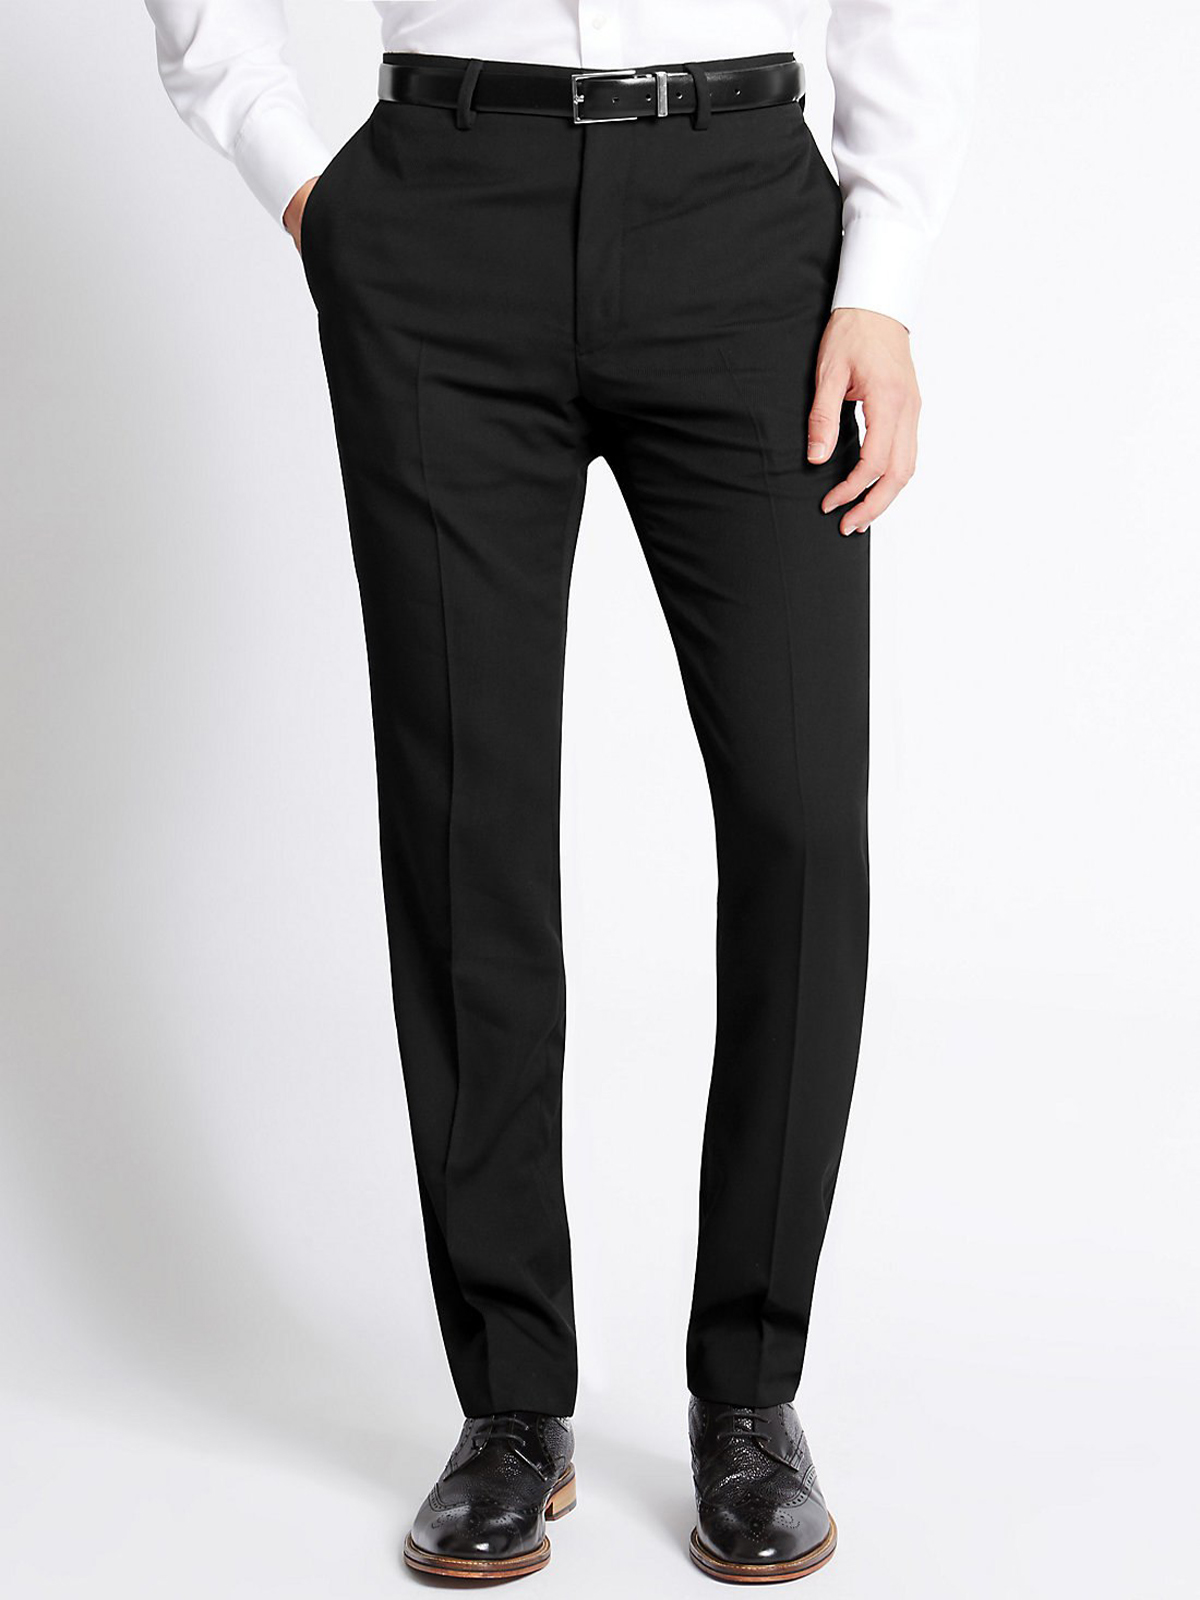 Marks and Spencer - - M&5 BLACK Tailored Fit Flat Front Trousers ...